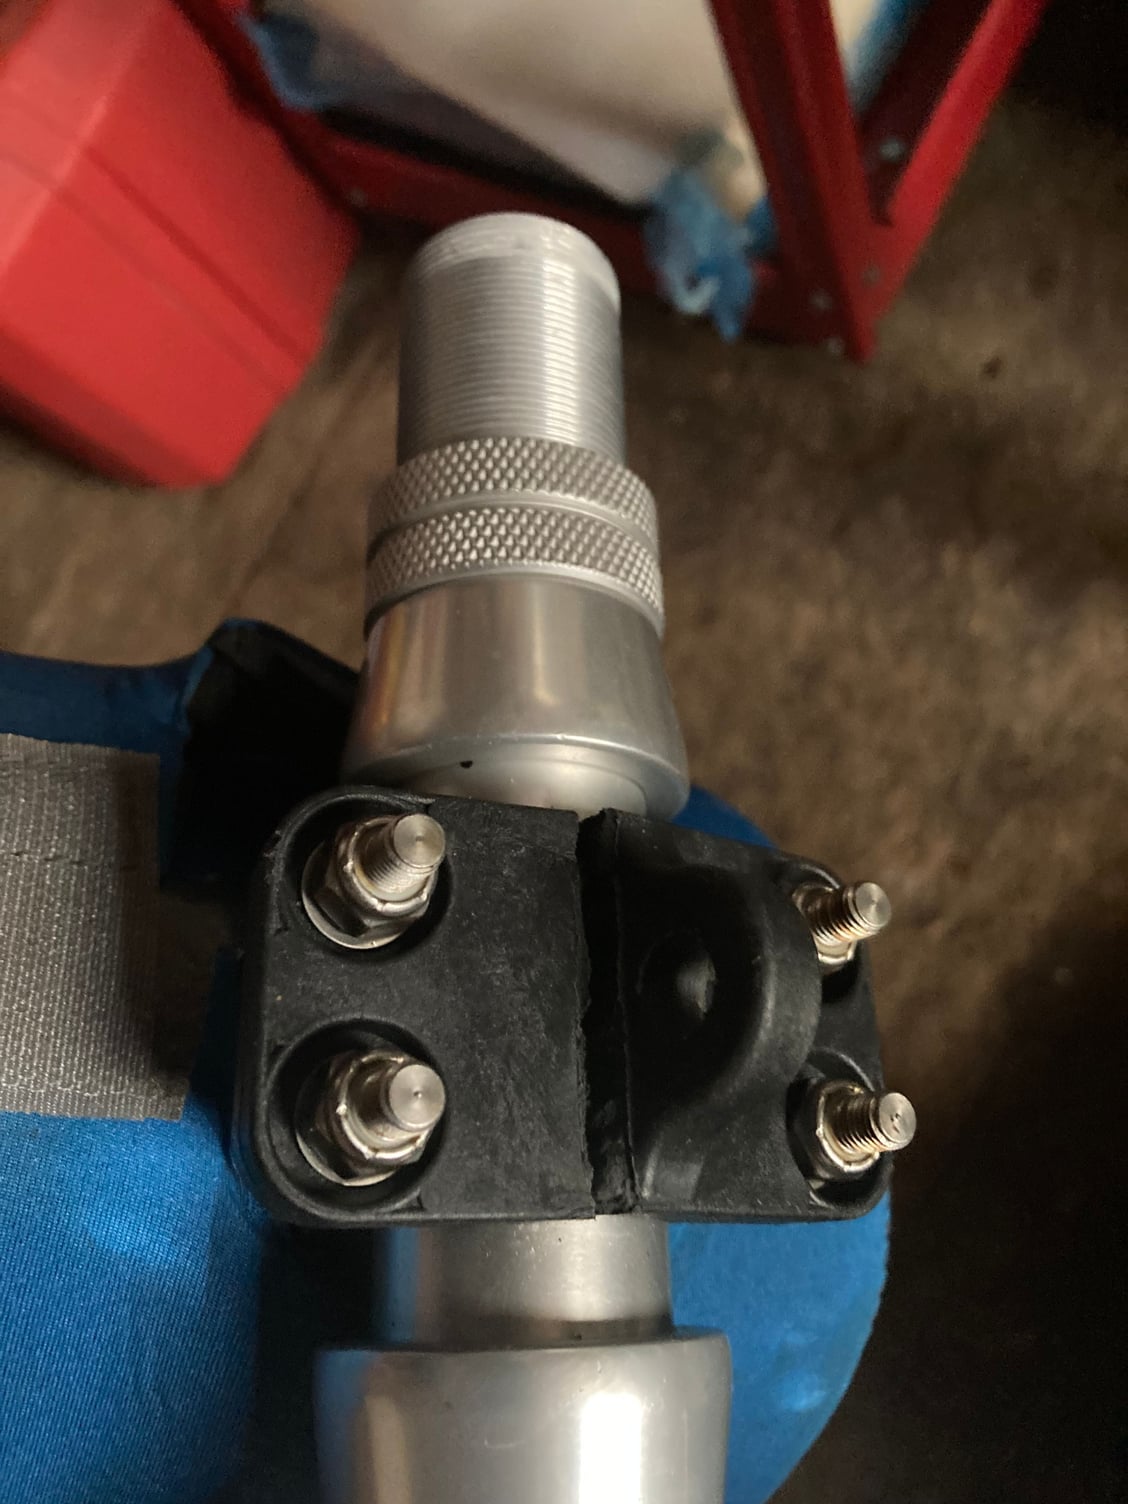 Avet T-RX 80W rod clamp broken - The Hull Truth - Boating and